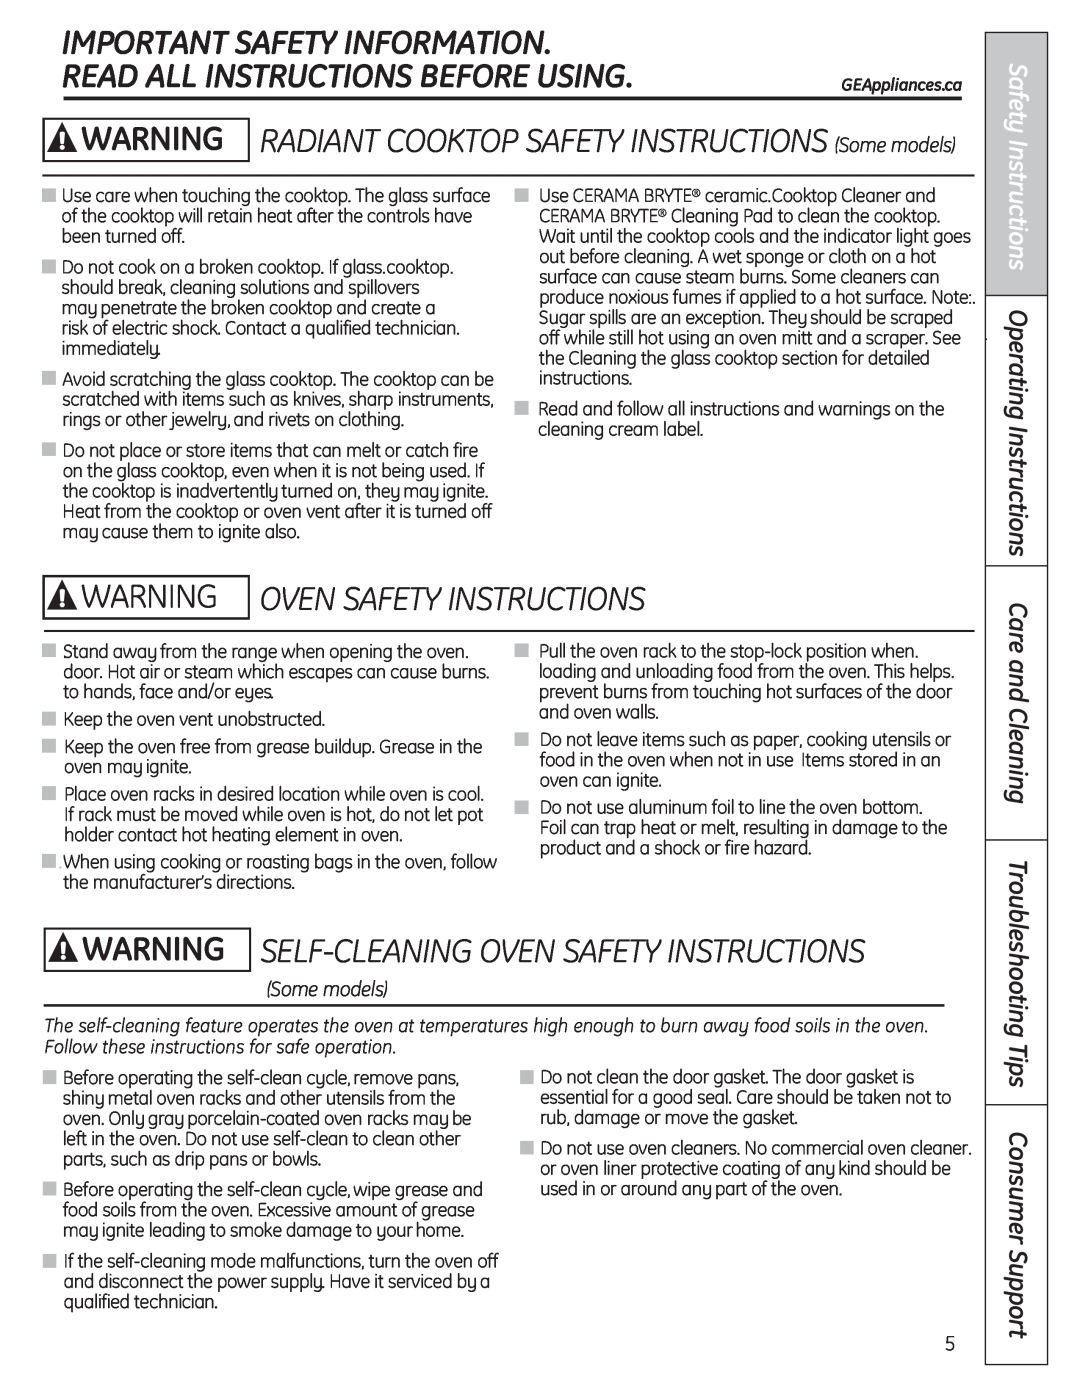 Mabe Canada JCBP240 Important Safety Information, Read All Instructions Before Using, Warning Oven Safety Instructions 